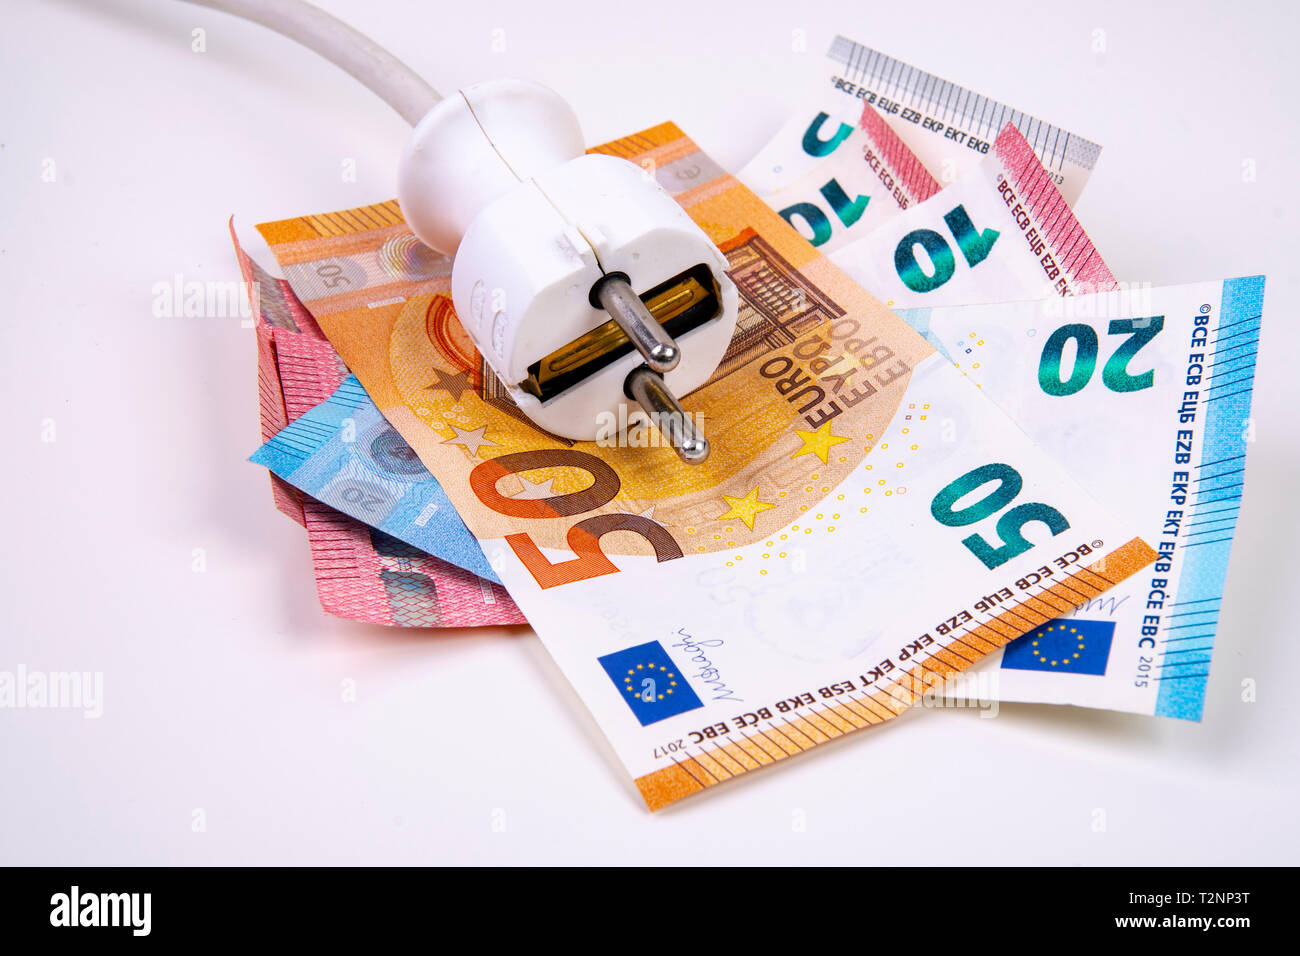 electricity-price-increase-socket-with-banknotes-stock-photo-alamy